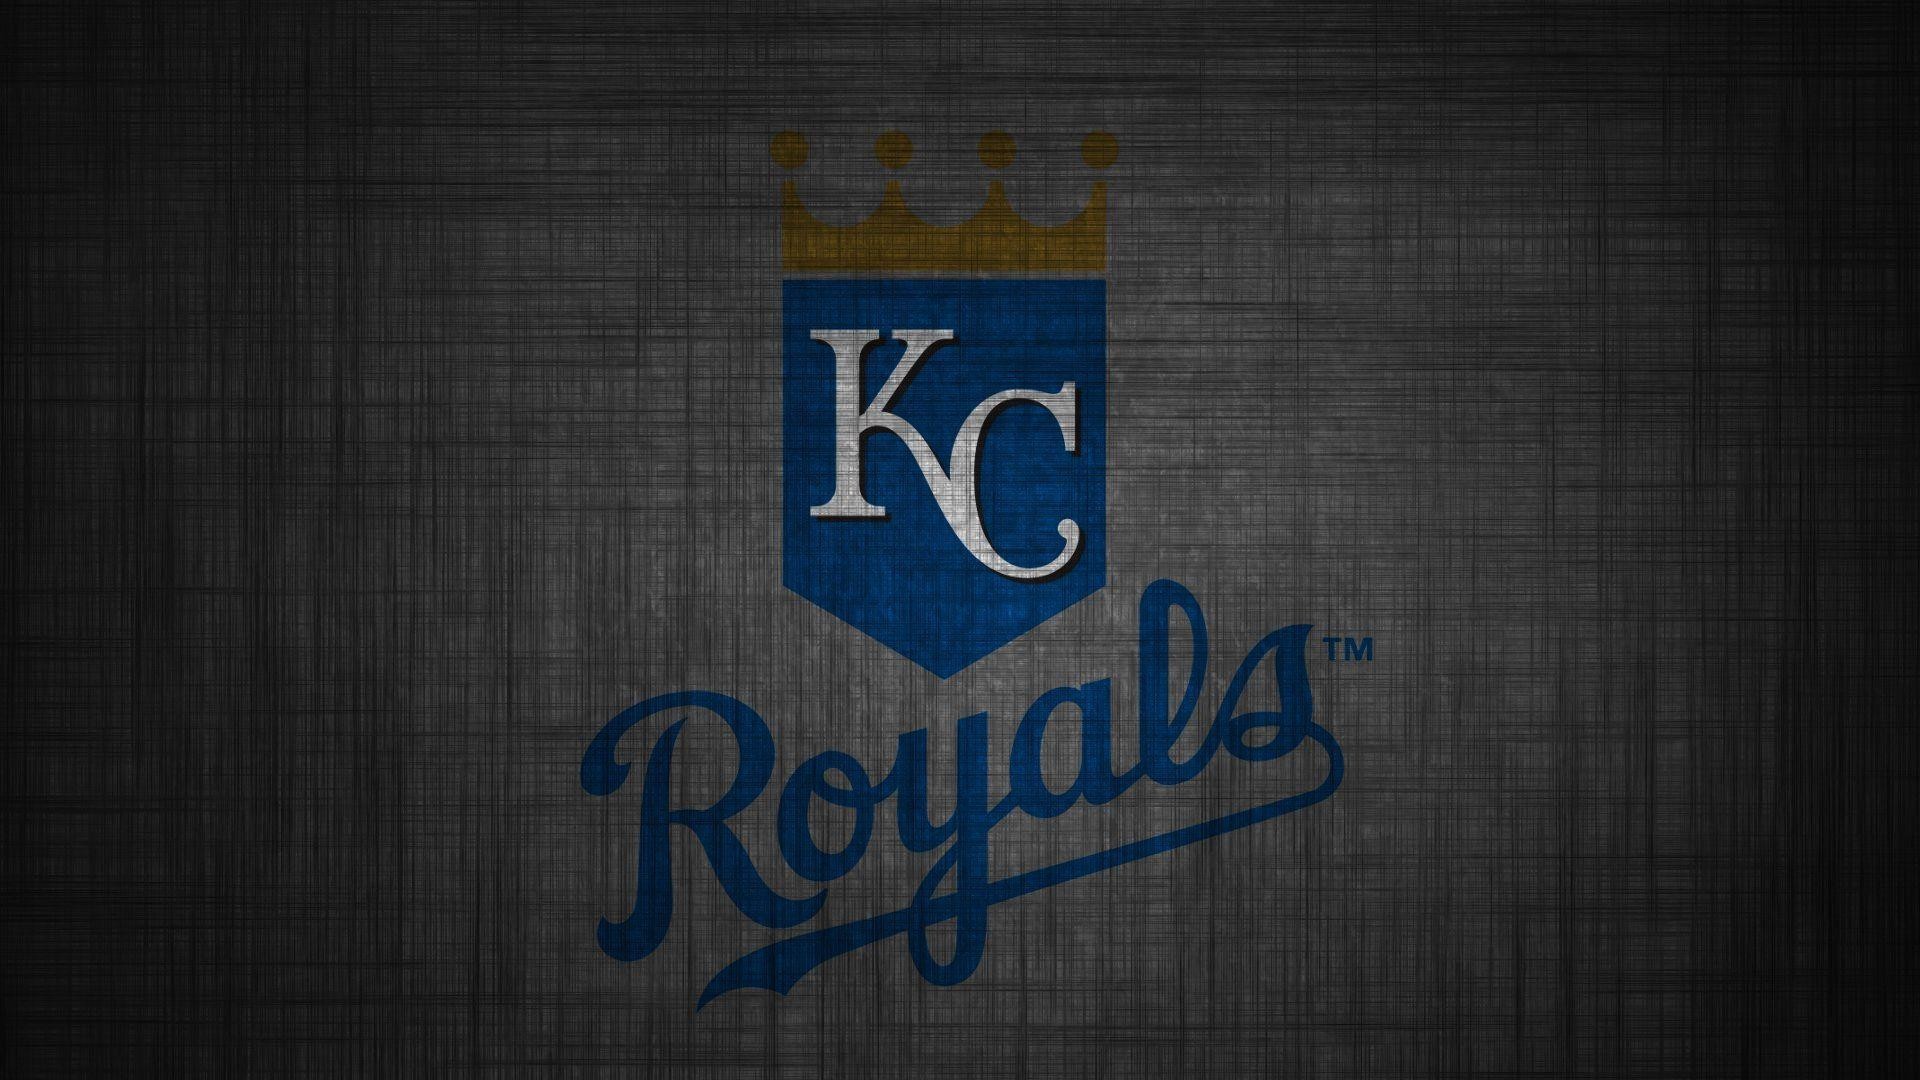 Kansas City Royals on X: These wallpapers will make a fine